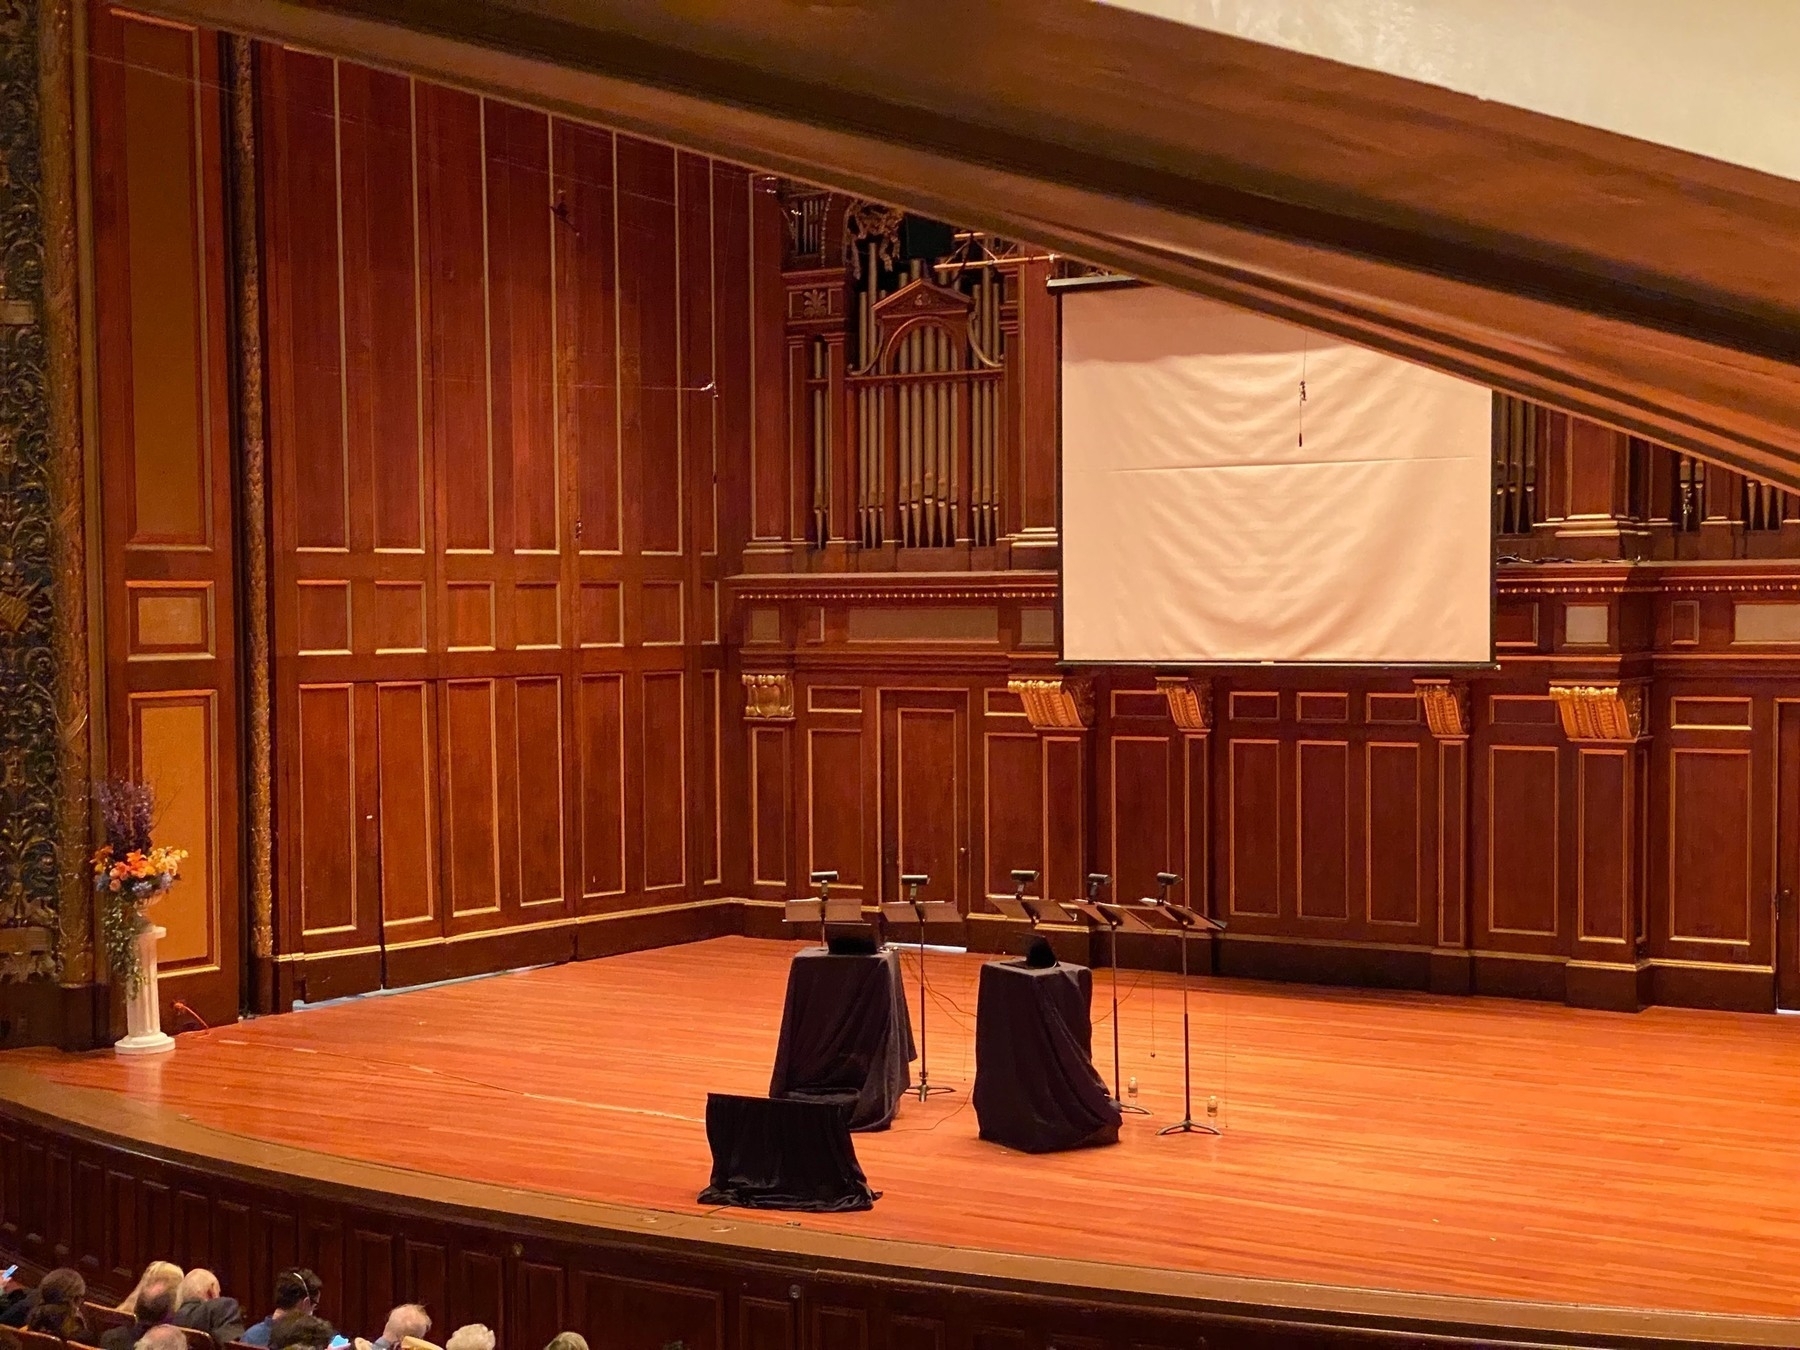 Bare stage with music stands and black boxes center stage, elaborate paneled walls behind, and a dumpy looking pull down screen on the wall.